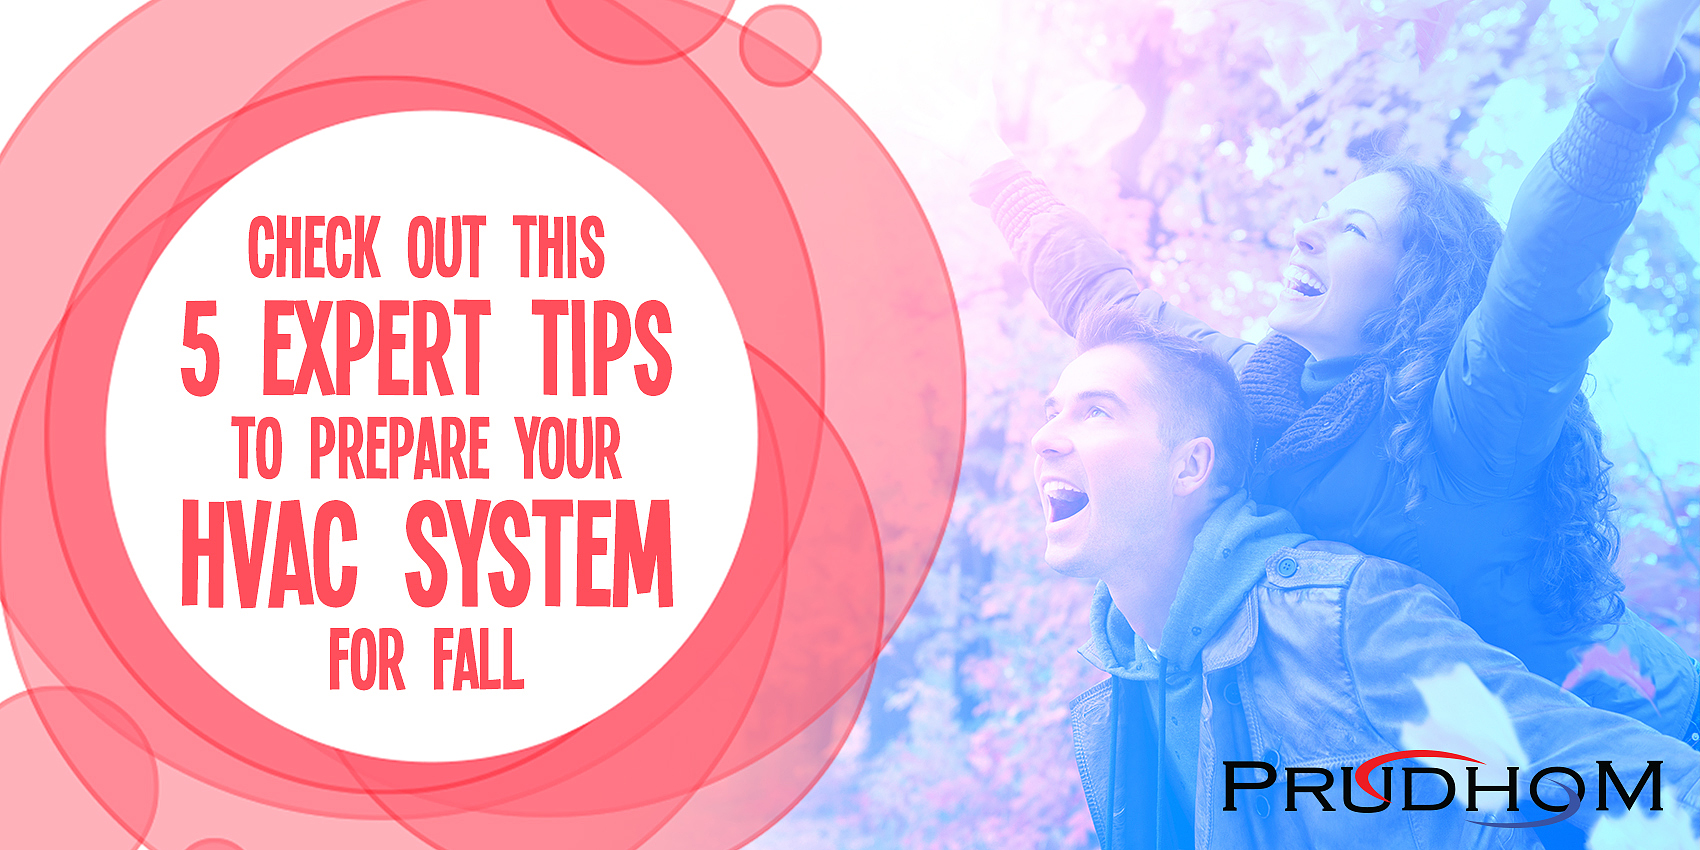 Check Out These 5 Expert Tips To Prepare Your HVAC System For Fall